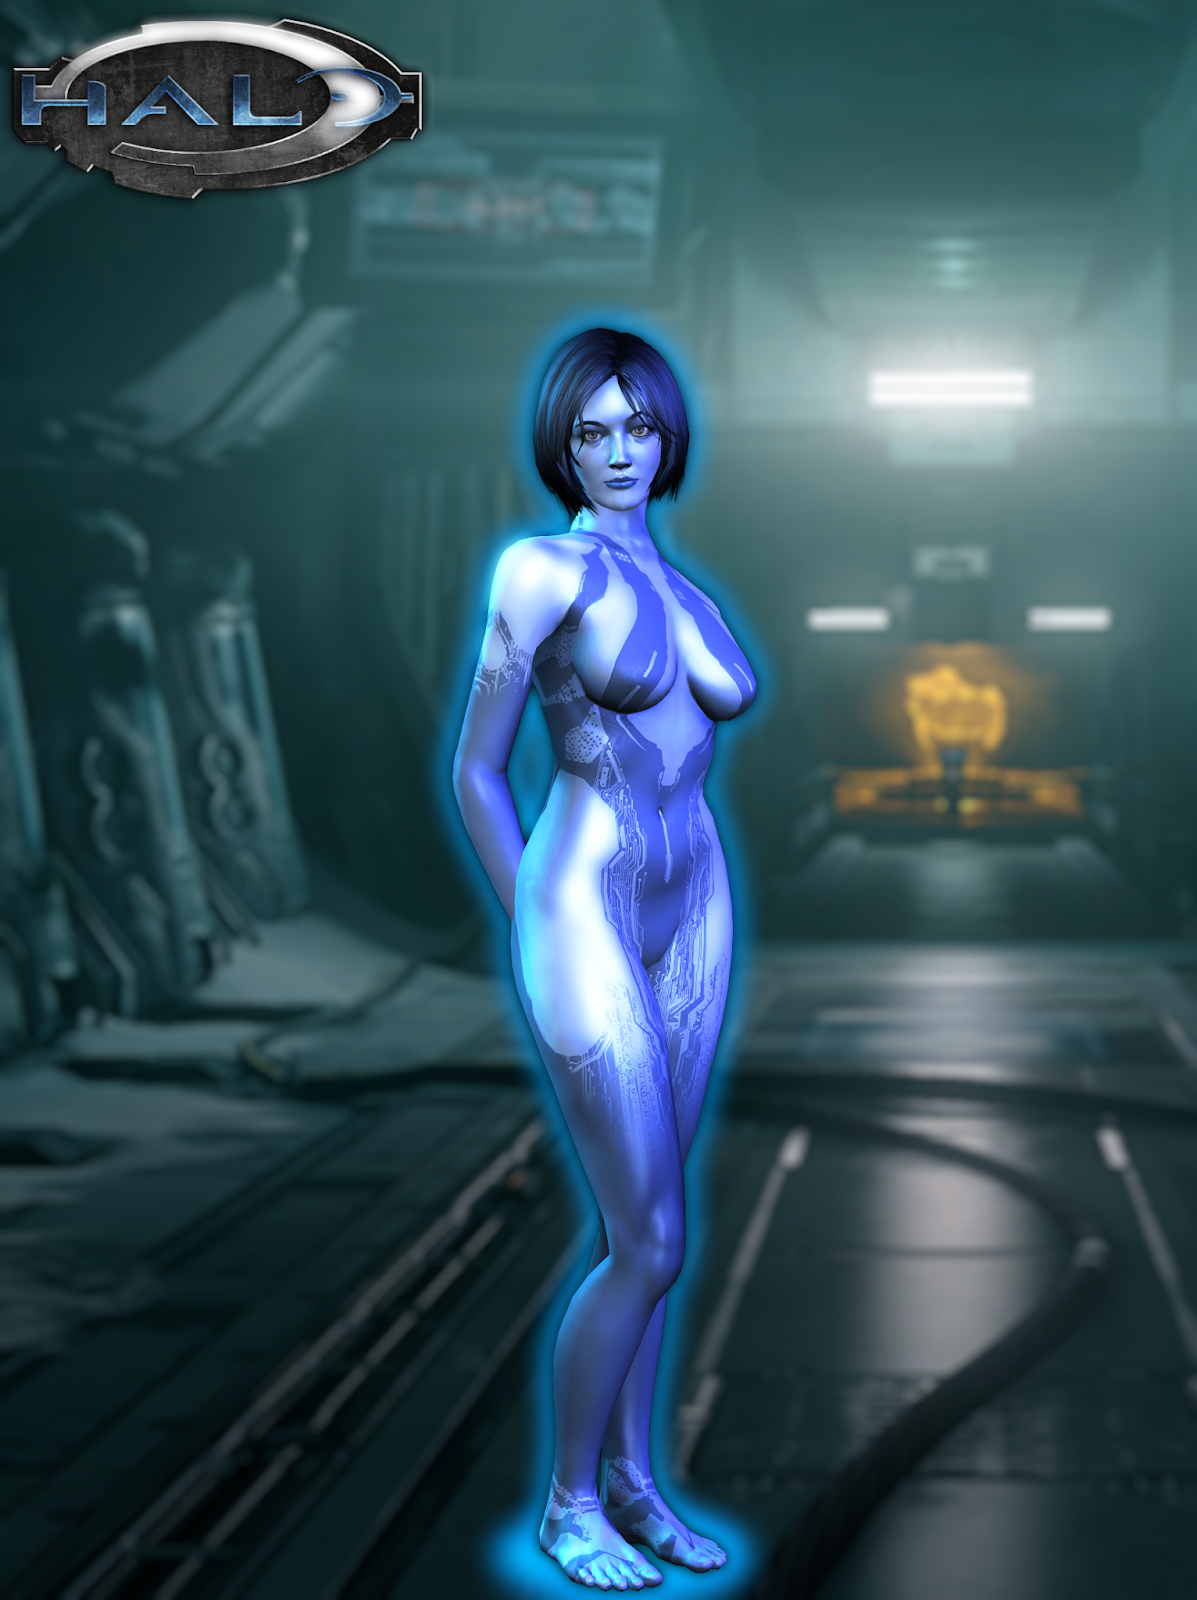 Here's a bonus image of Cortana sent in by Atomic Chinchilla during he...